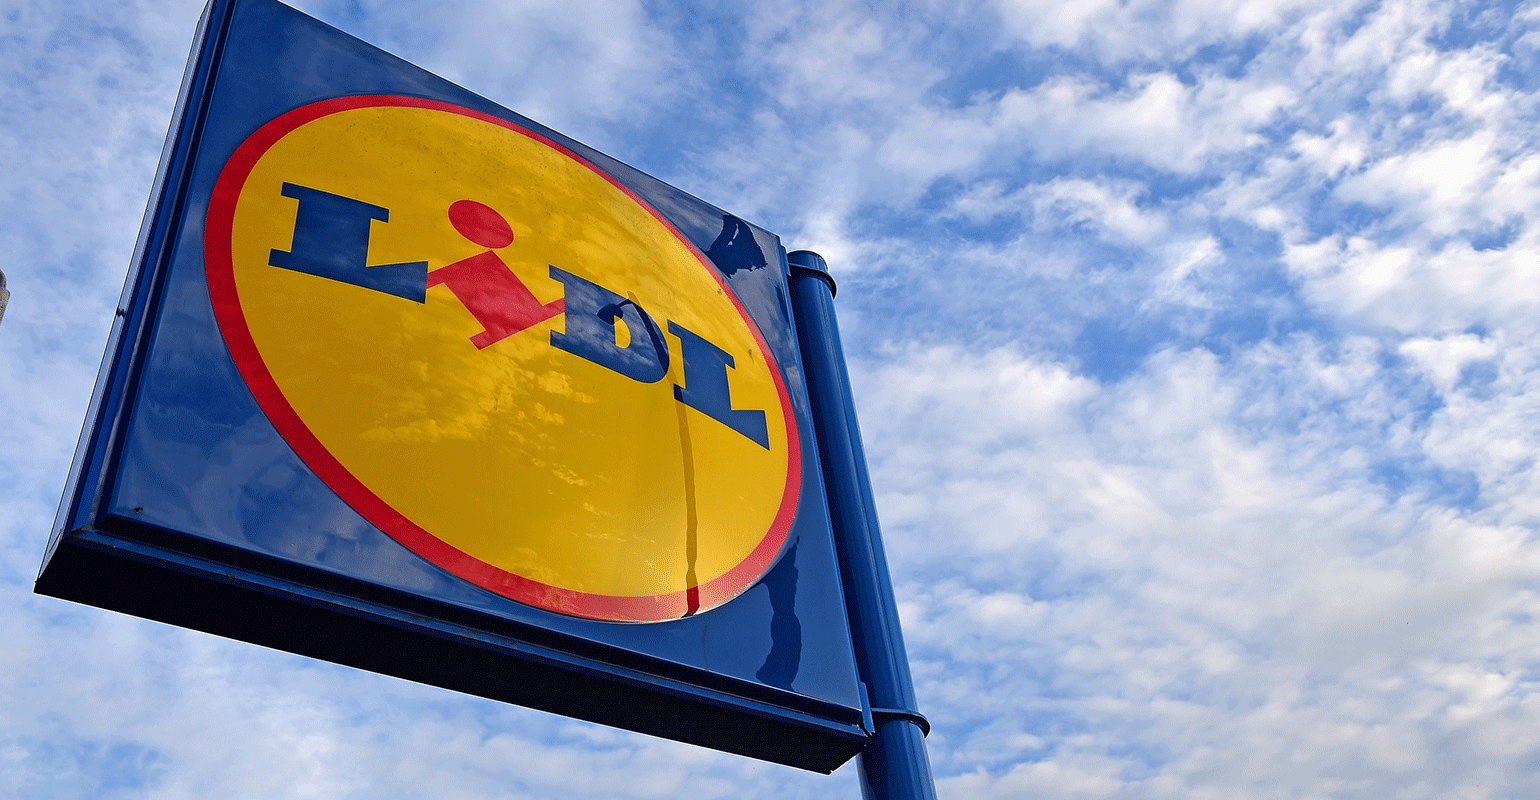 Lidl: First U.S. stores opening June | Supermarket News